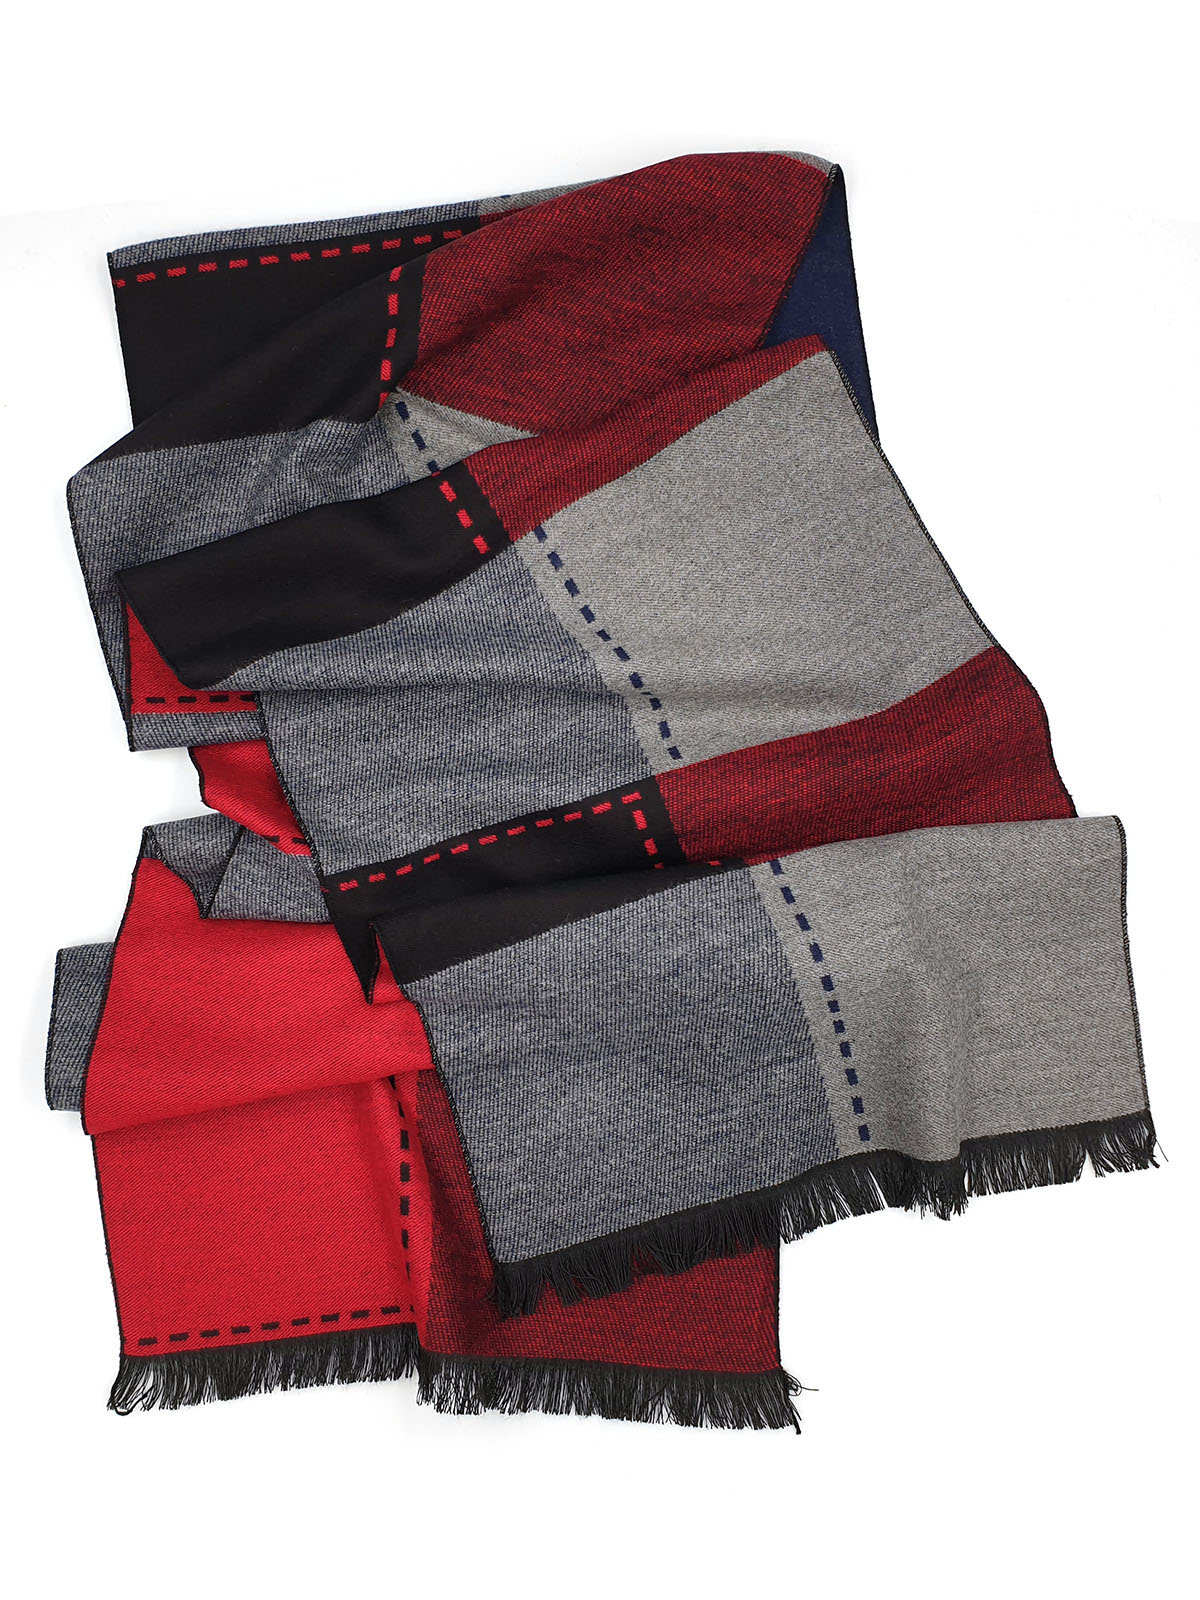 A colorful square scarf - 10326 - € 19.68 img2